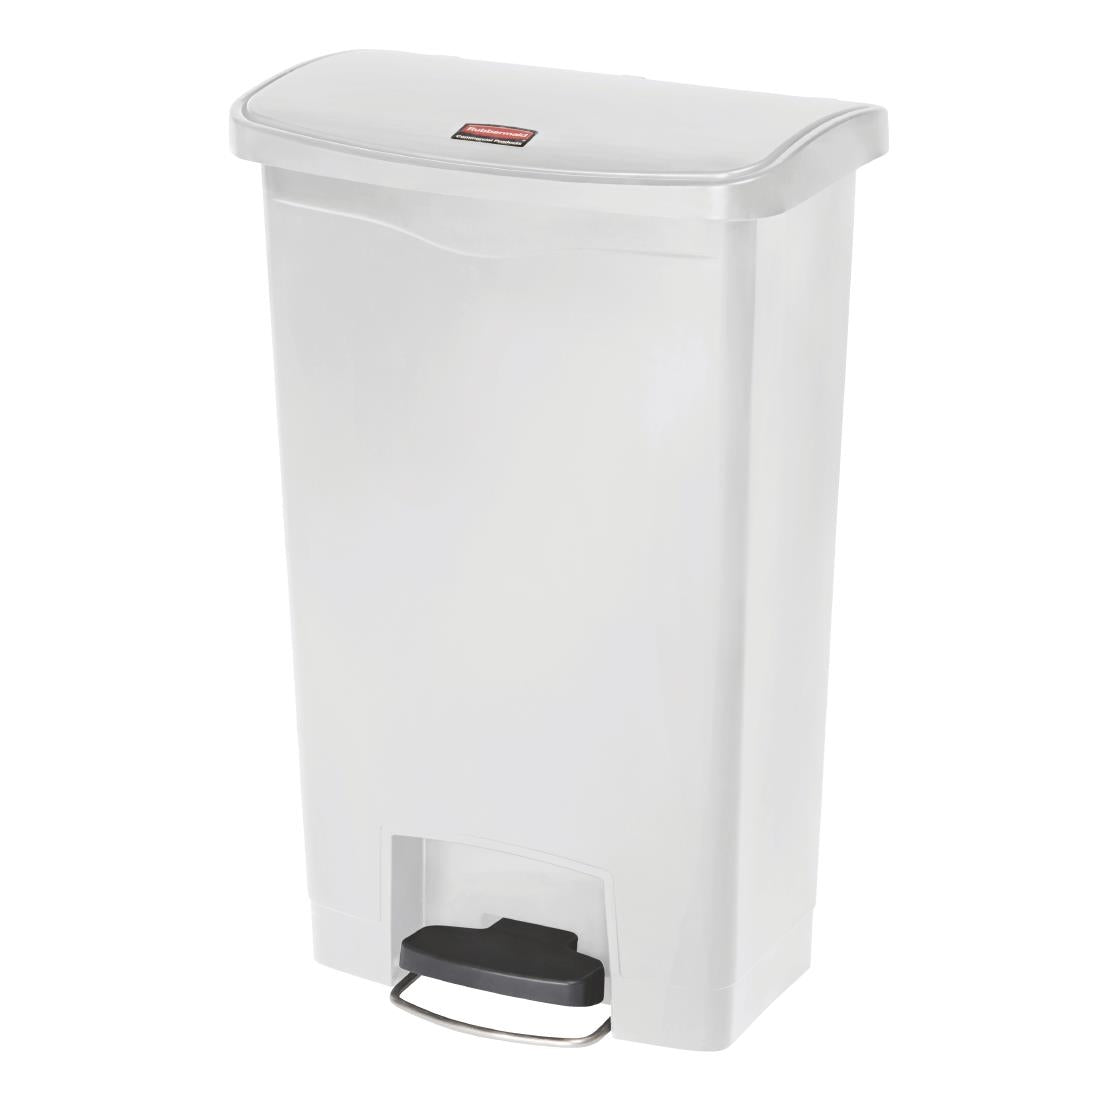 CW586 Rubbermaid Slim Jim Step on Bin Front Pedal 50Ltr White JD Catering Equipment Solutions Ltd